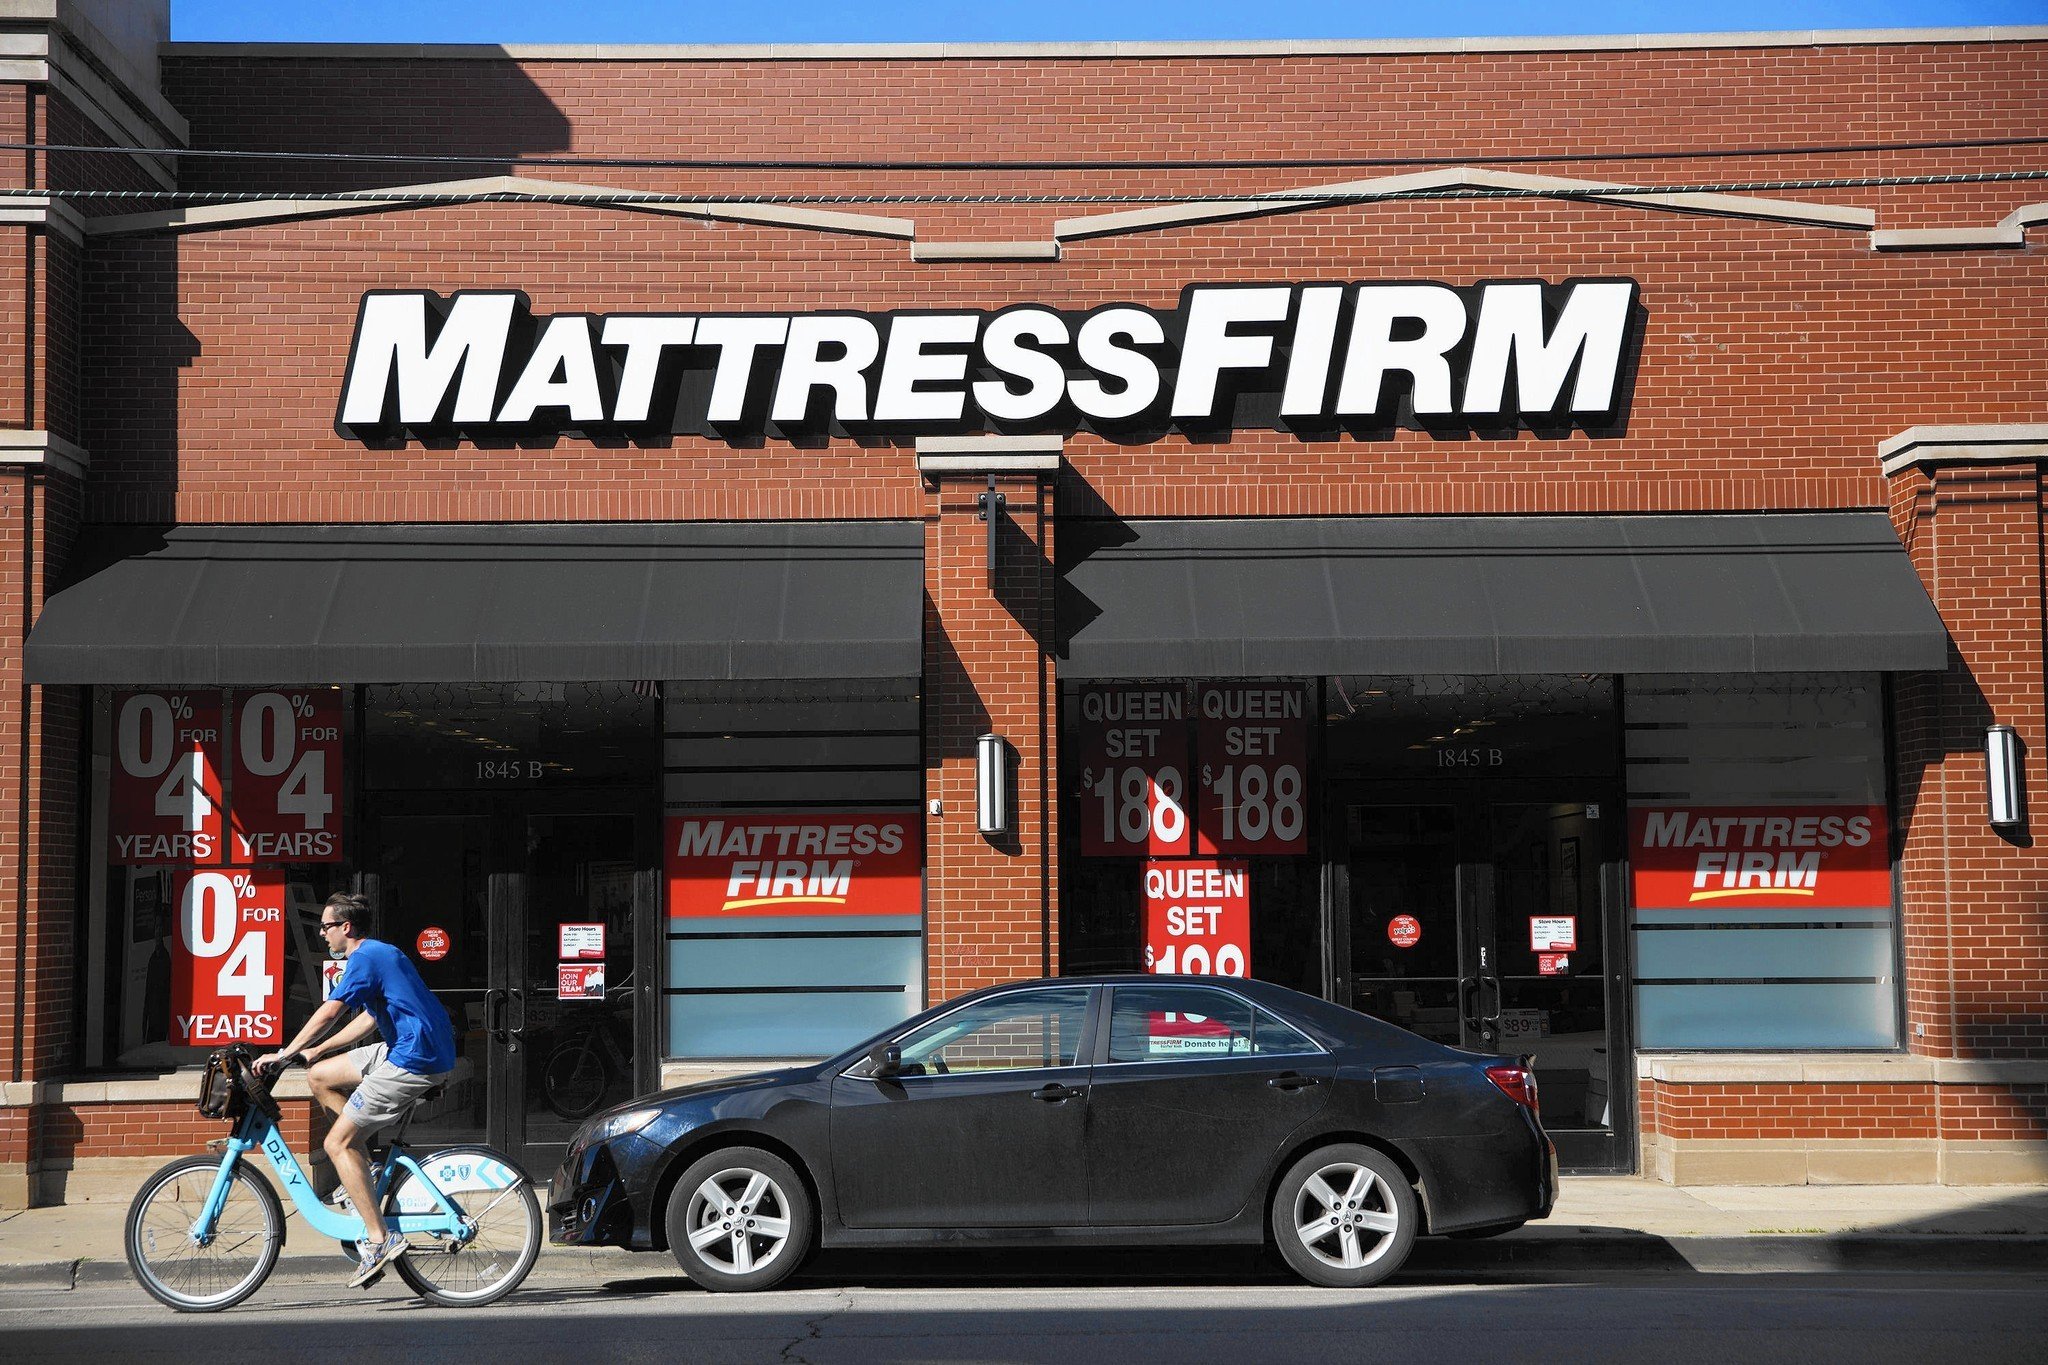 Why are there so many mattress stores?